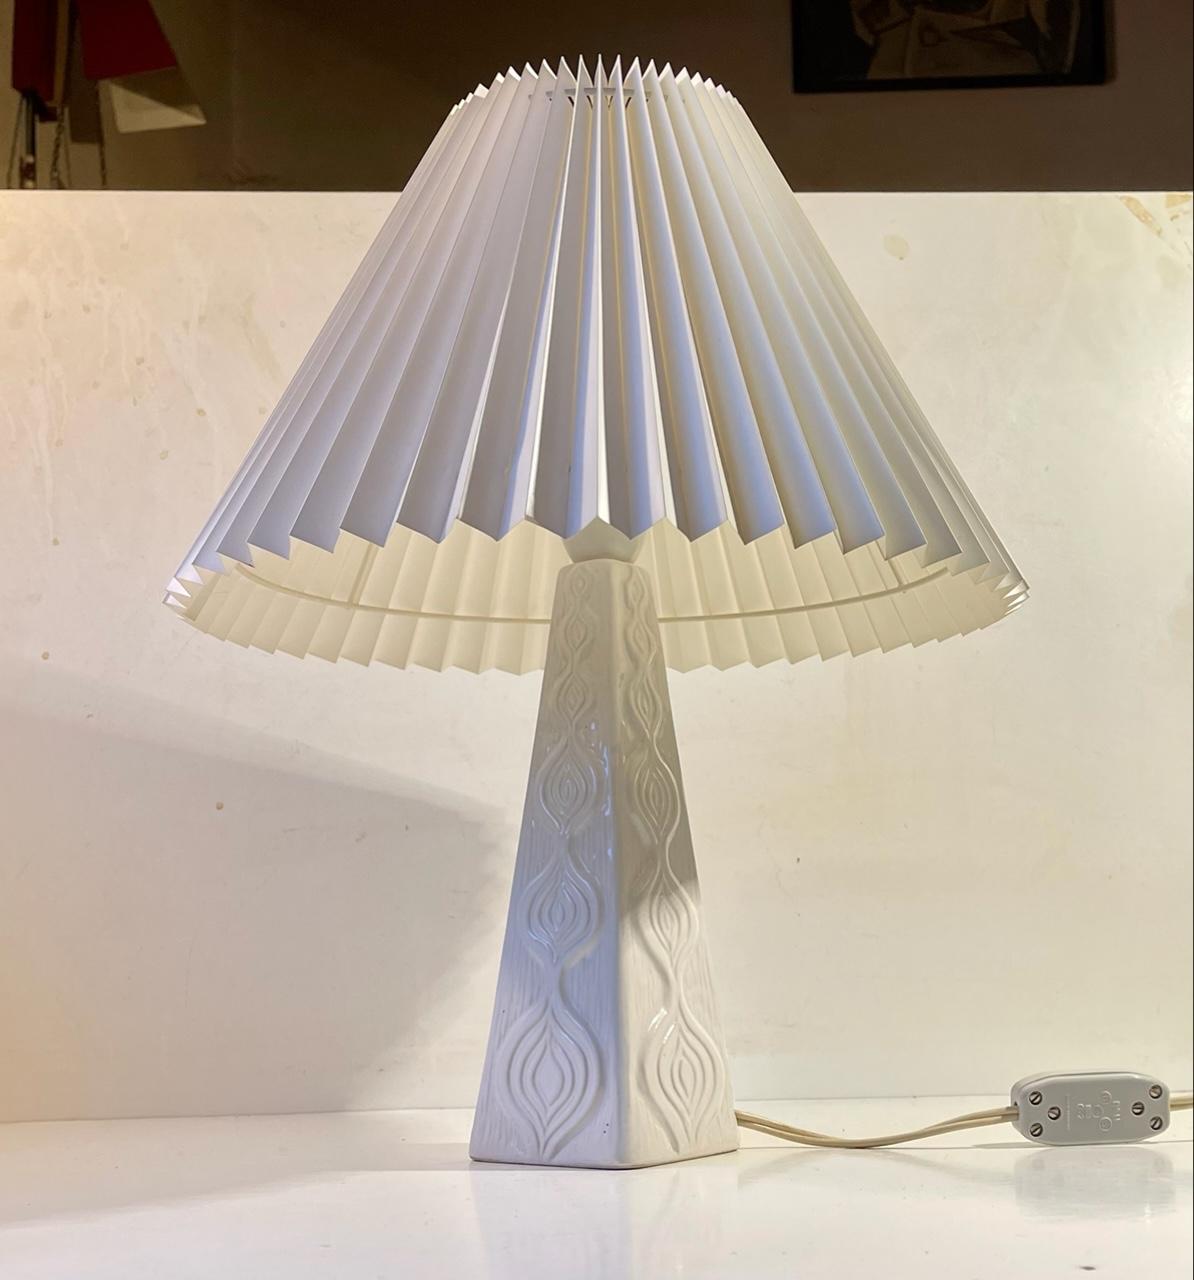 - White glazed Ceramic table lamp decorated onion patterns in relief
- Designed and manufactured by Elisabeth Loholt in Denmark during the 1950s in a style reminiscent of Ingrid Atterberg and Michael Andersen.
- This light is fully functional but